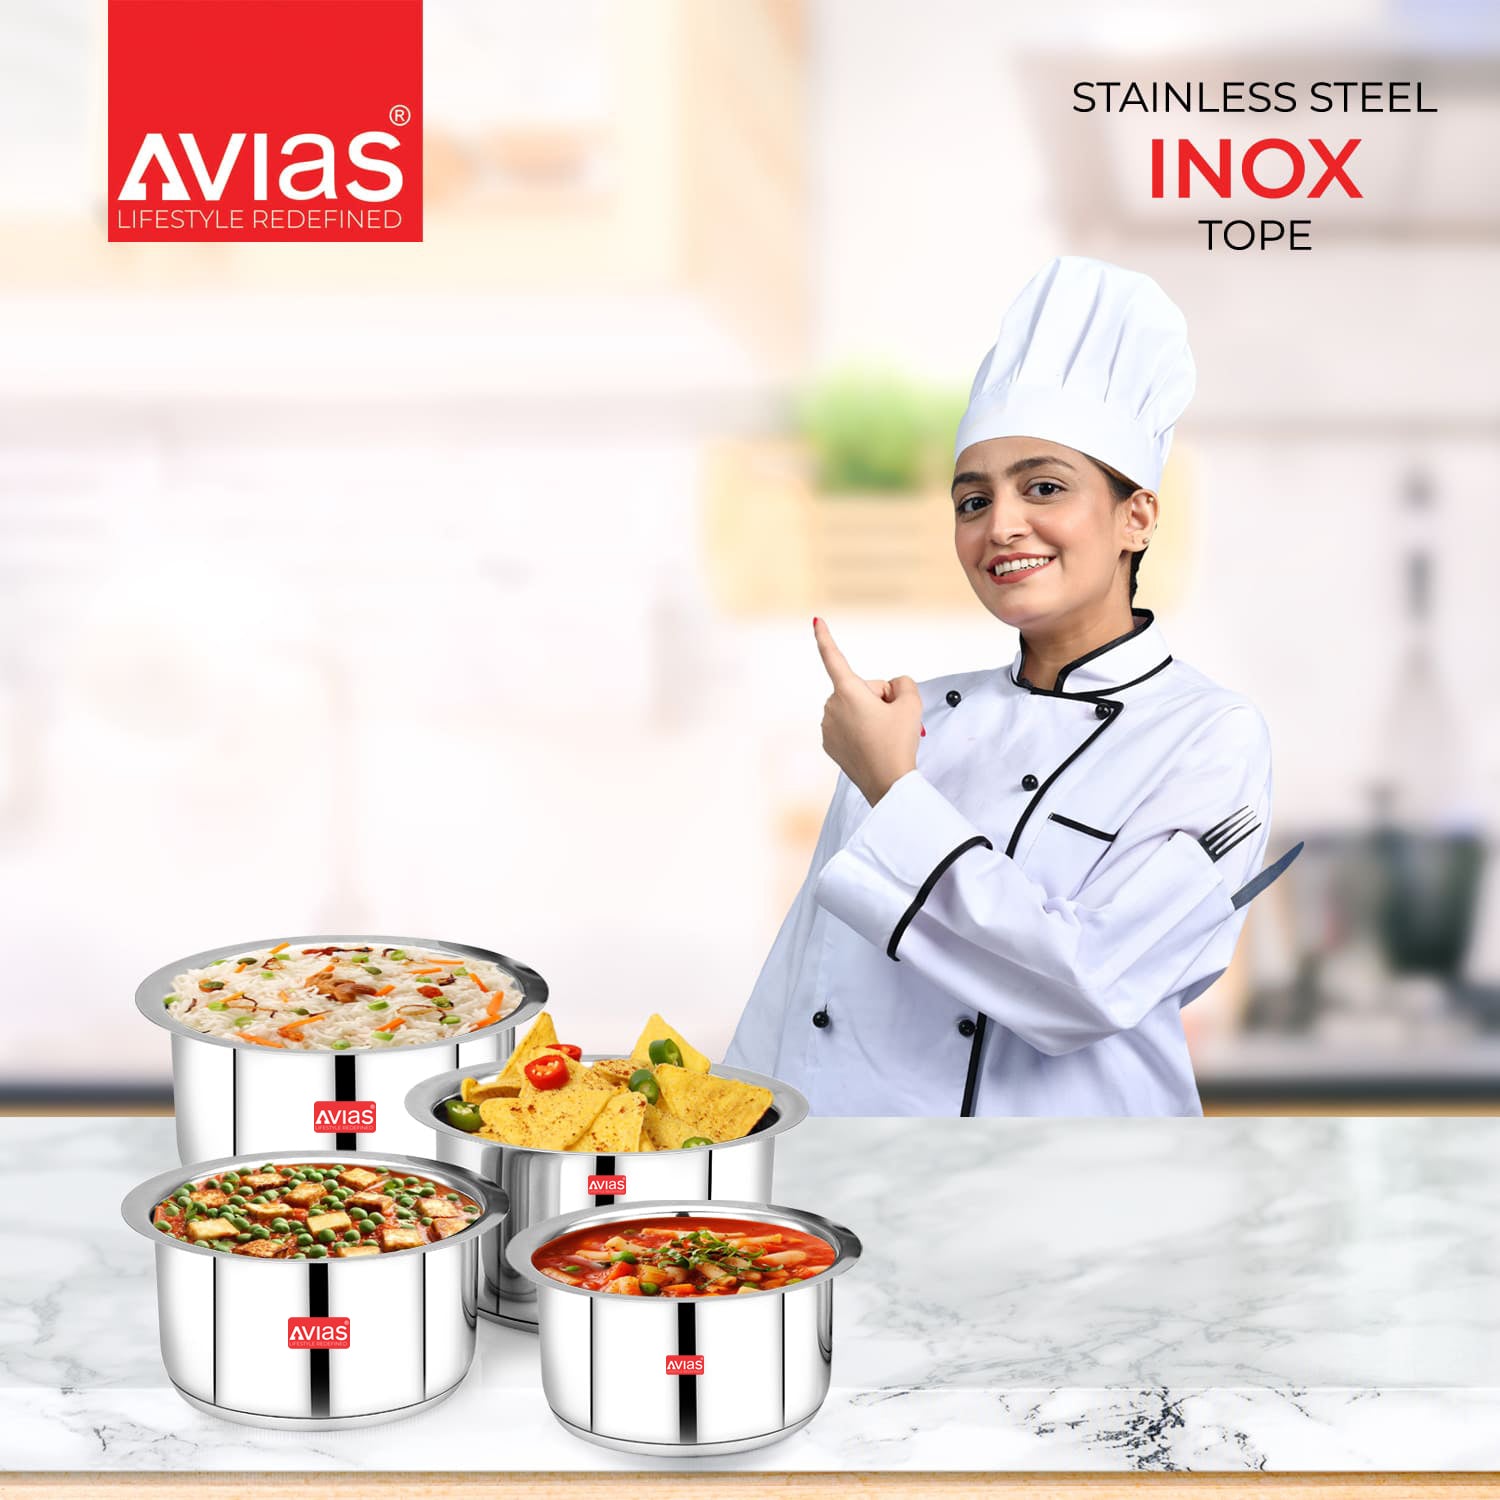 AVIAS Inox IB Stainless Steel Tope set of 4 for cooking and serving food in the kitchen